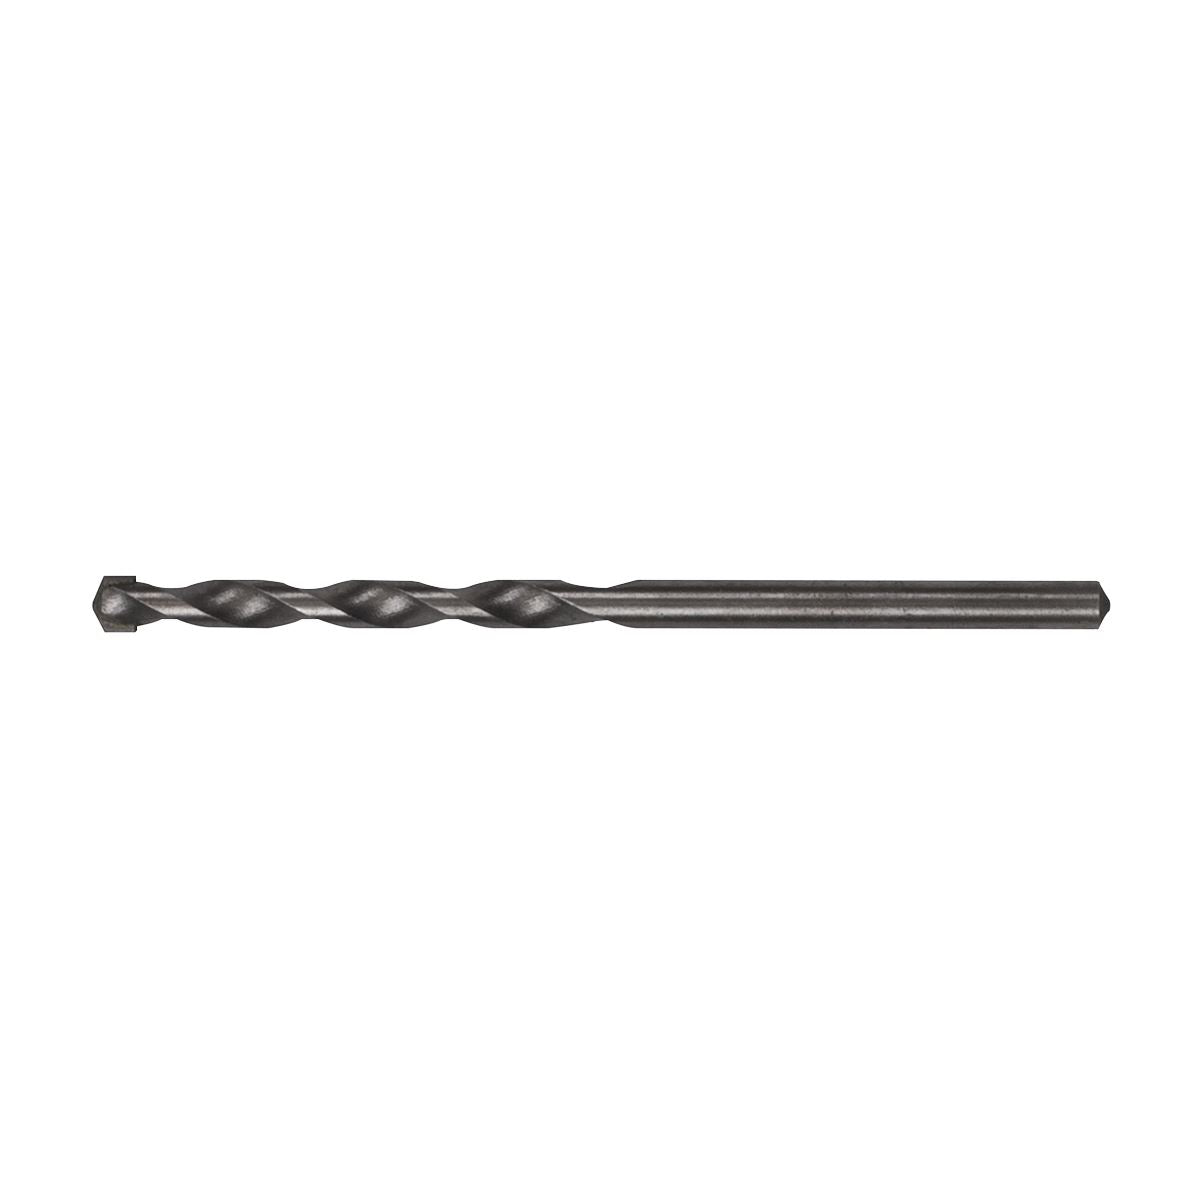 Worksafe by Sealey Straight Shank Rotary Impact Drill Bit Ø5 x 100mm